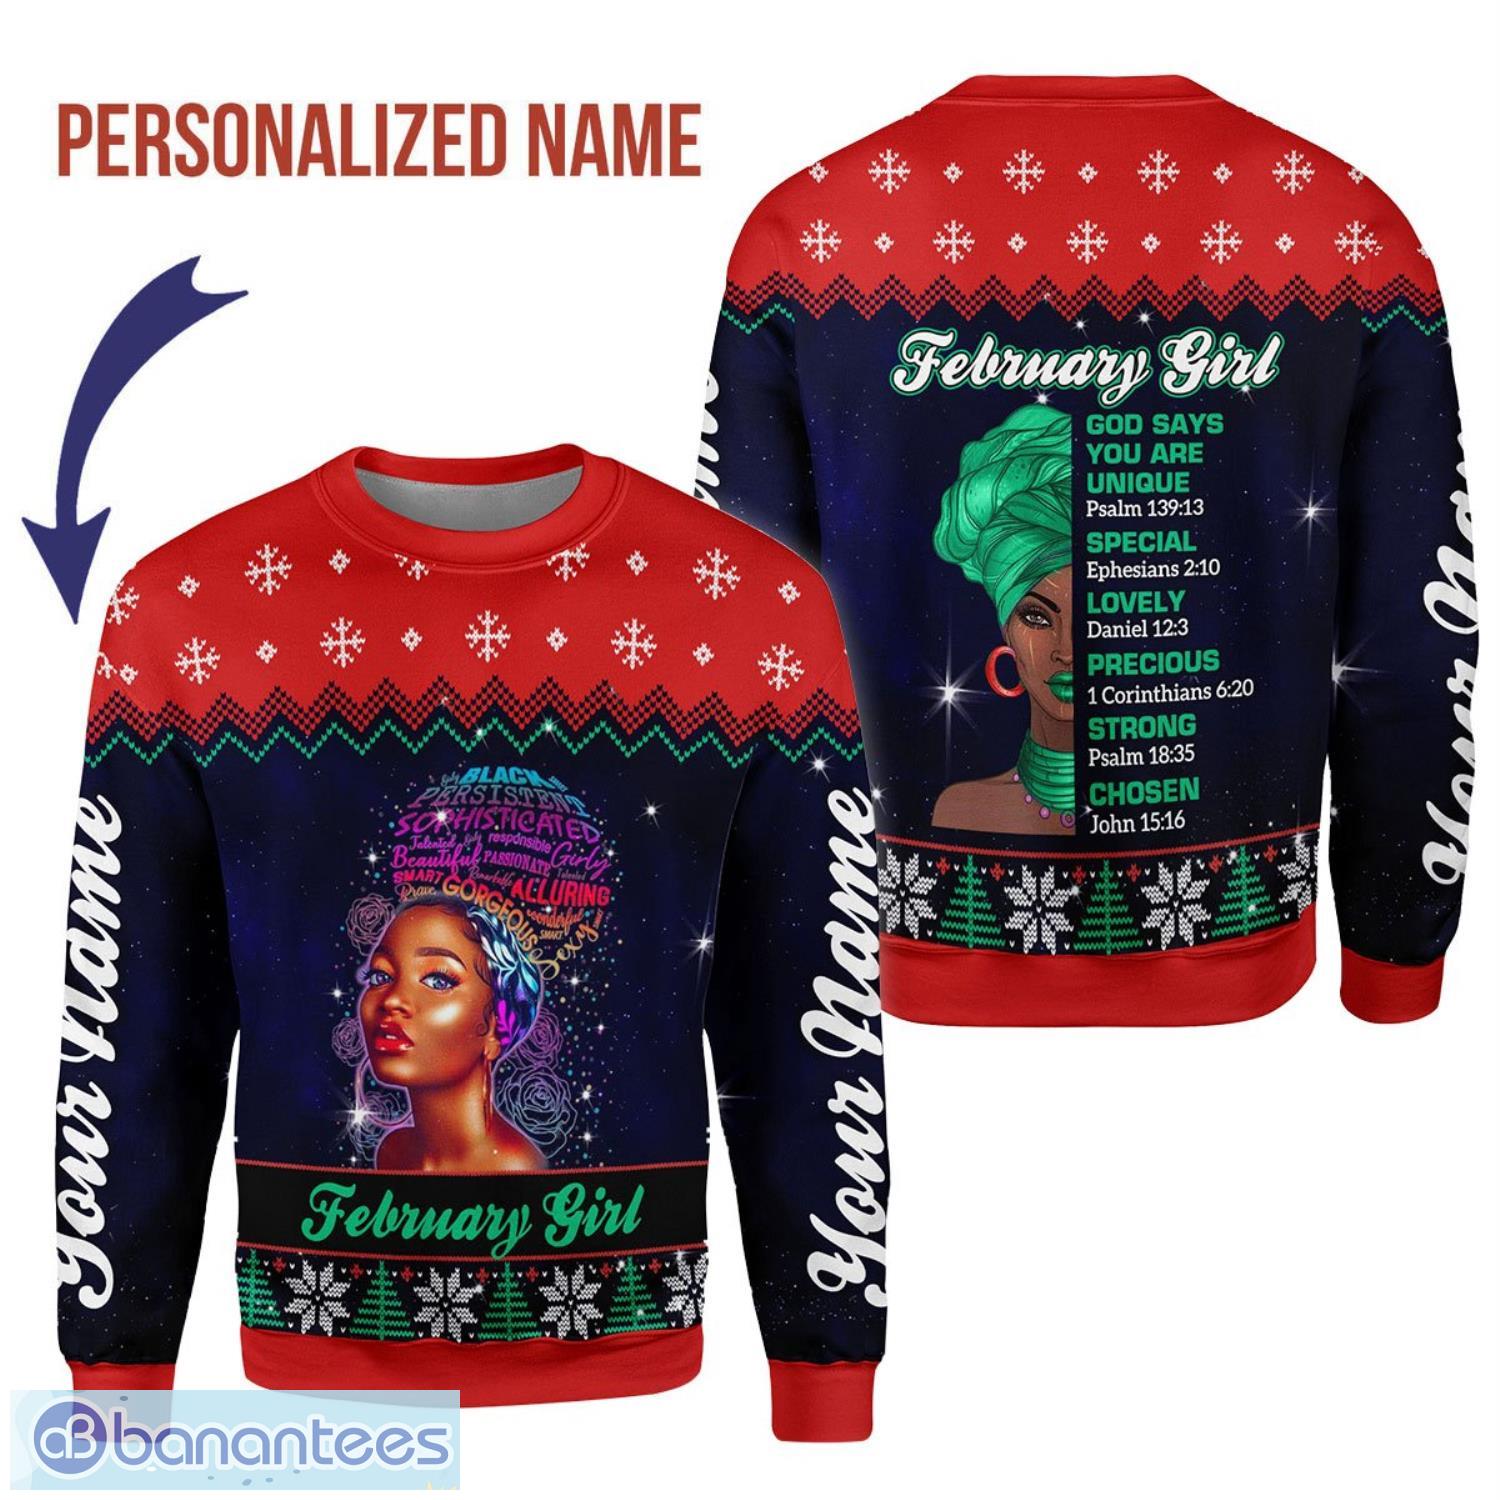 Personalized Name February Girl God Says You Are Unique 3D Ugly Christmas Sweater Christmas Gift Product Photo 1